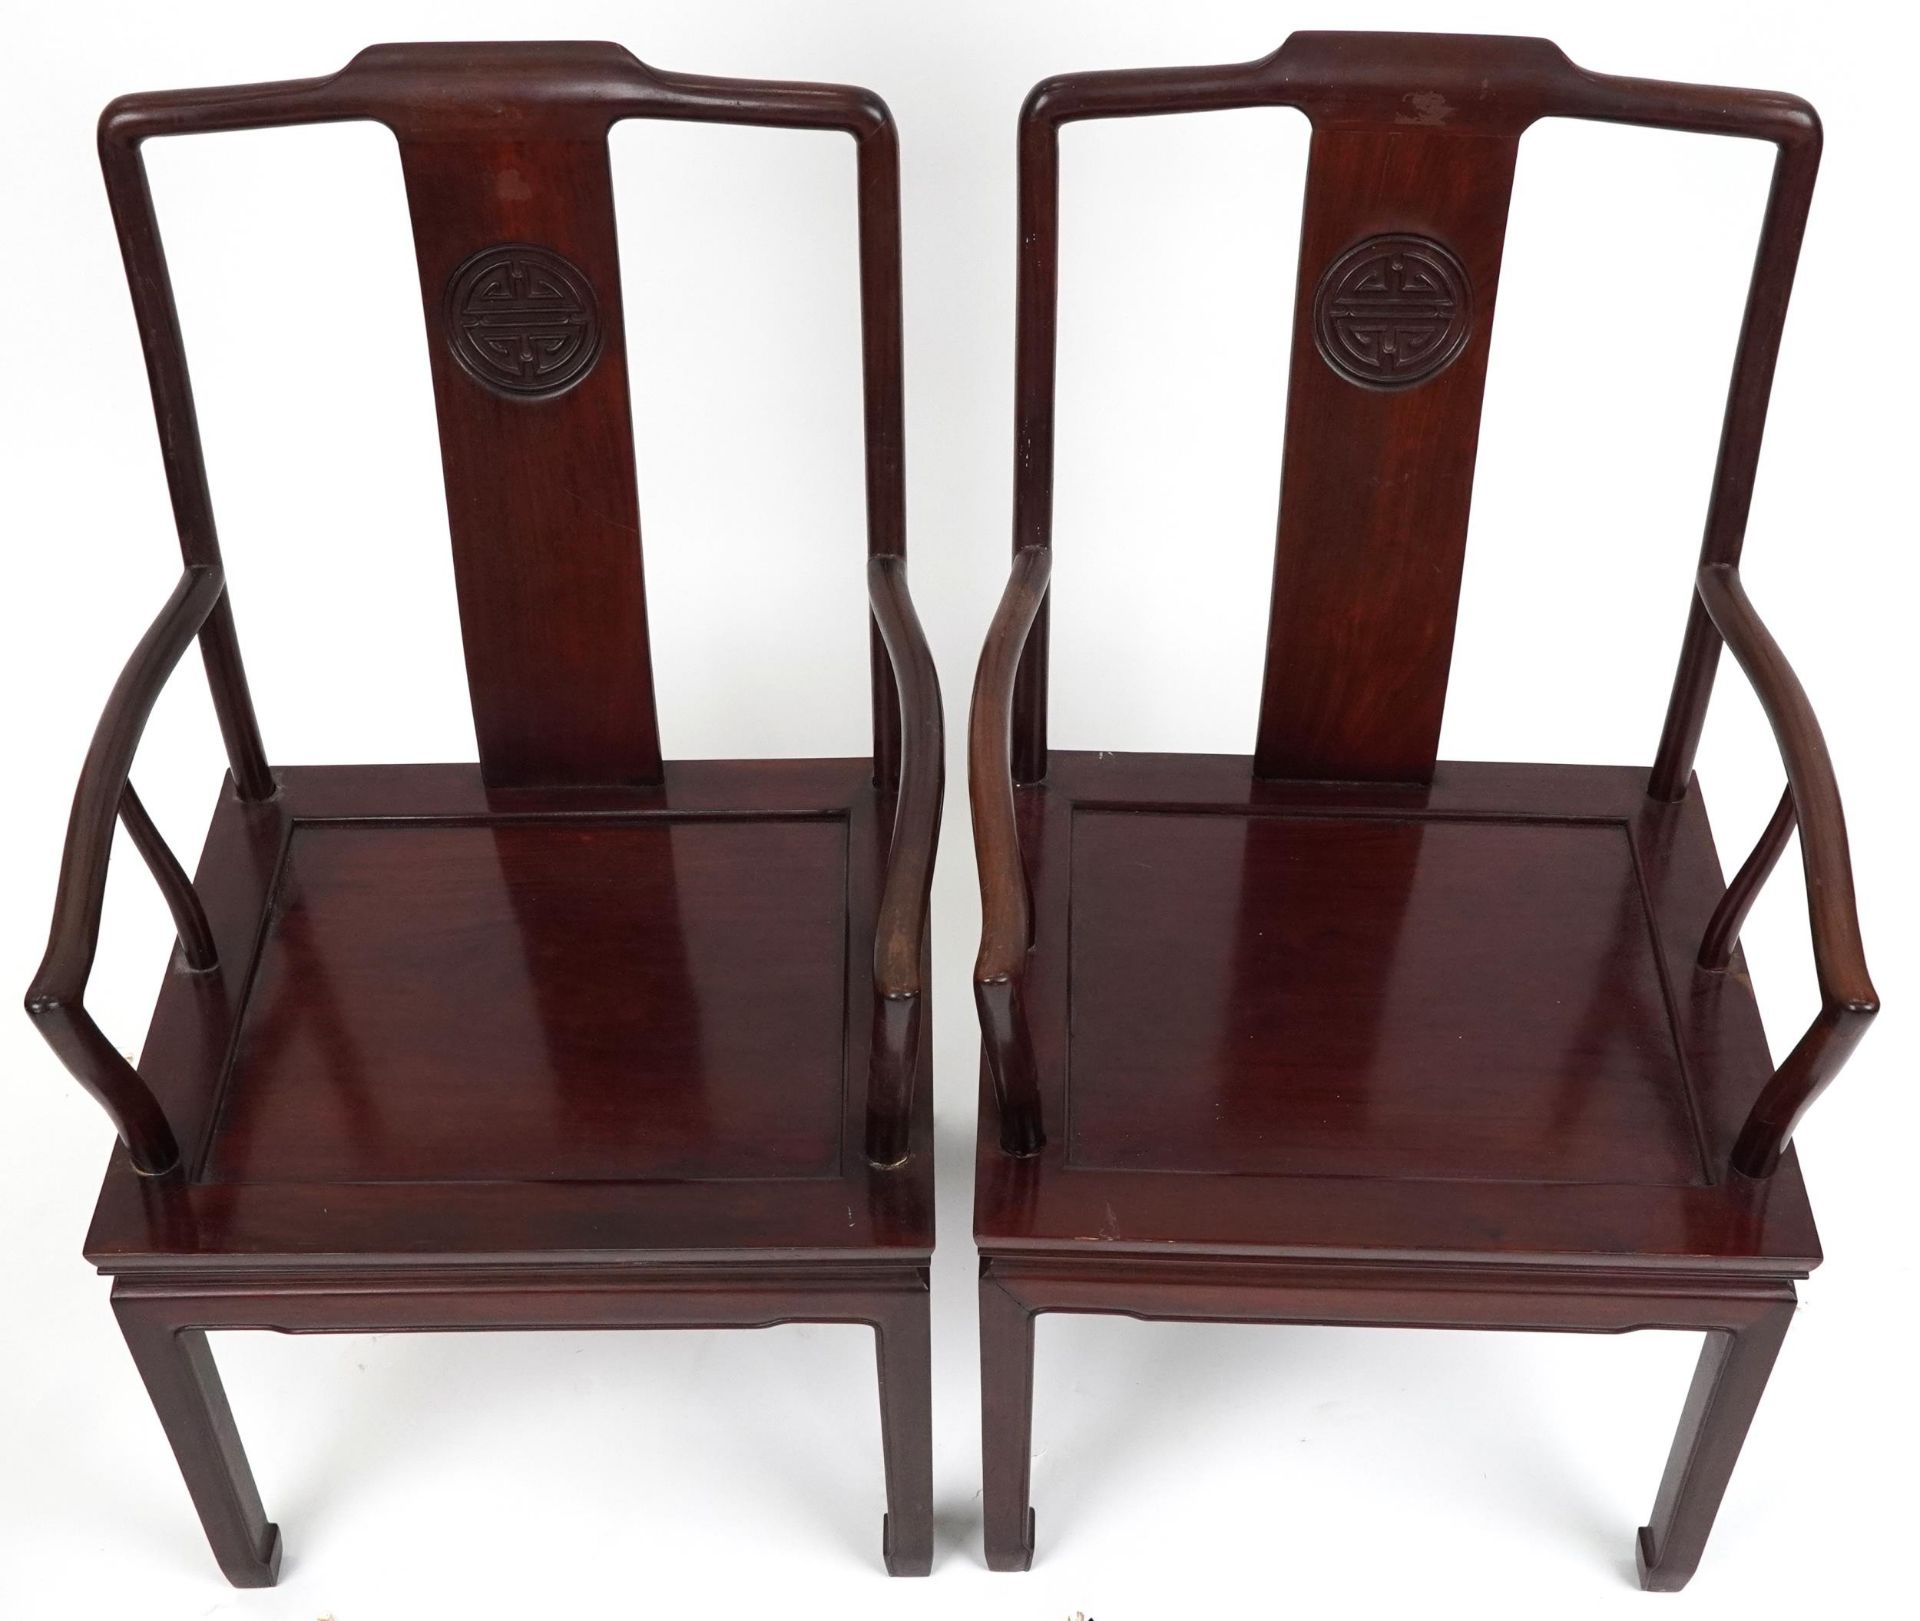 Pair of Chinese hardwood throne chairs, each 96cm high - Image 3 of 4